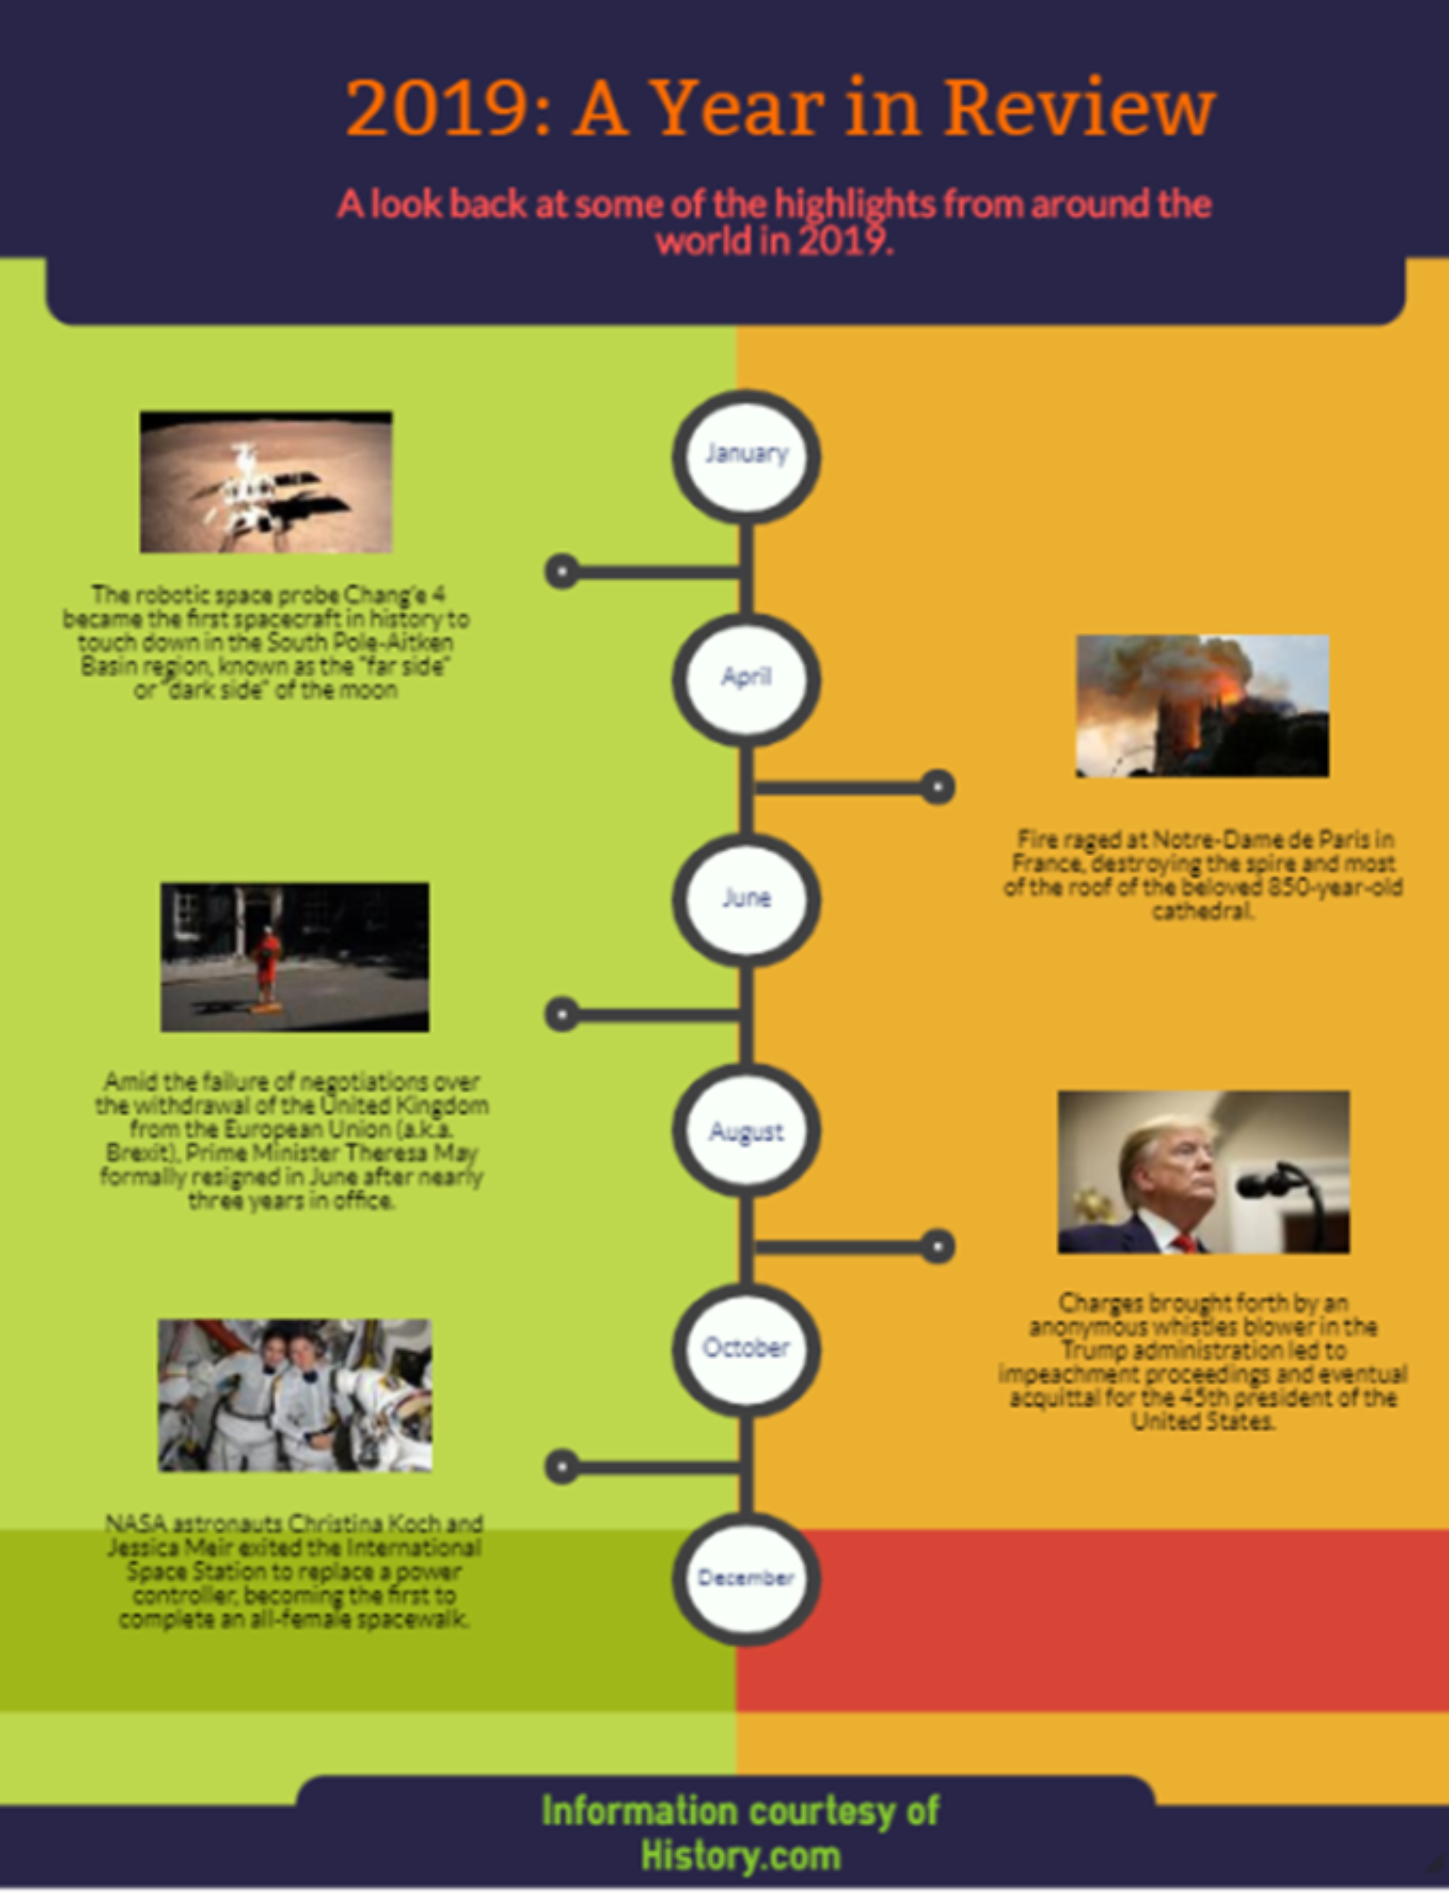 An information graphic featuring a timeline historic events titled 2019: a Year in Review.